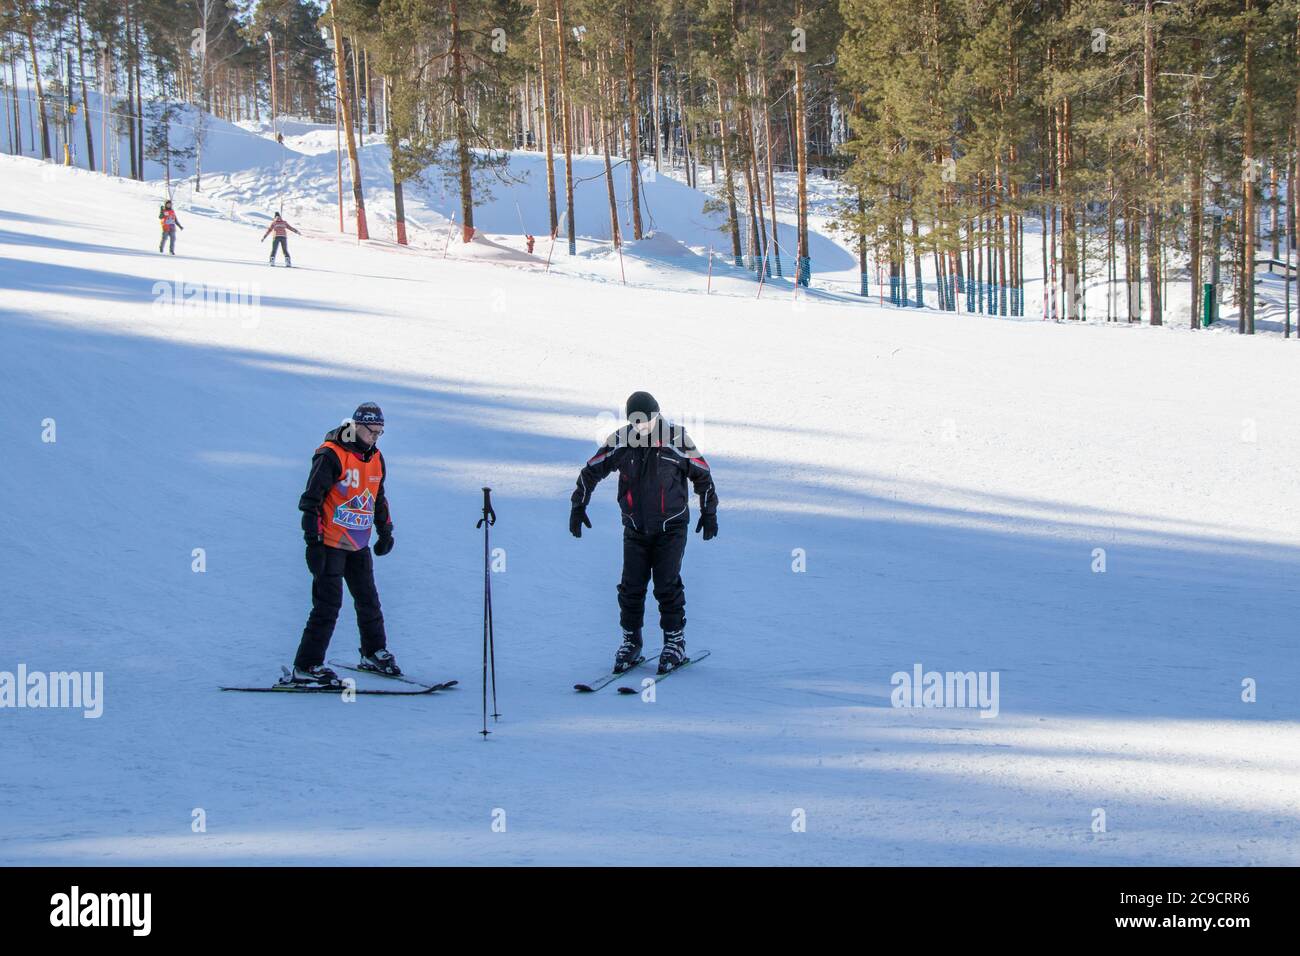 Yekaterinburg, Russia - February 26, 2019. Training slope of the sports complex on Uktus Mountain. A elder trainer teaches a man skiing. Stock Photo